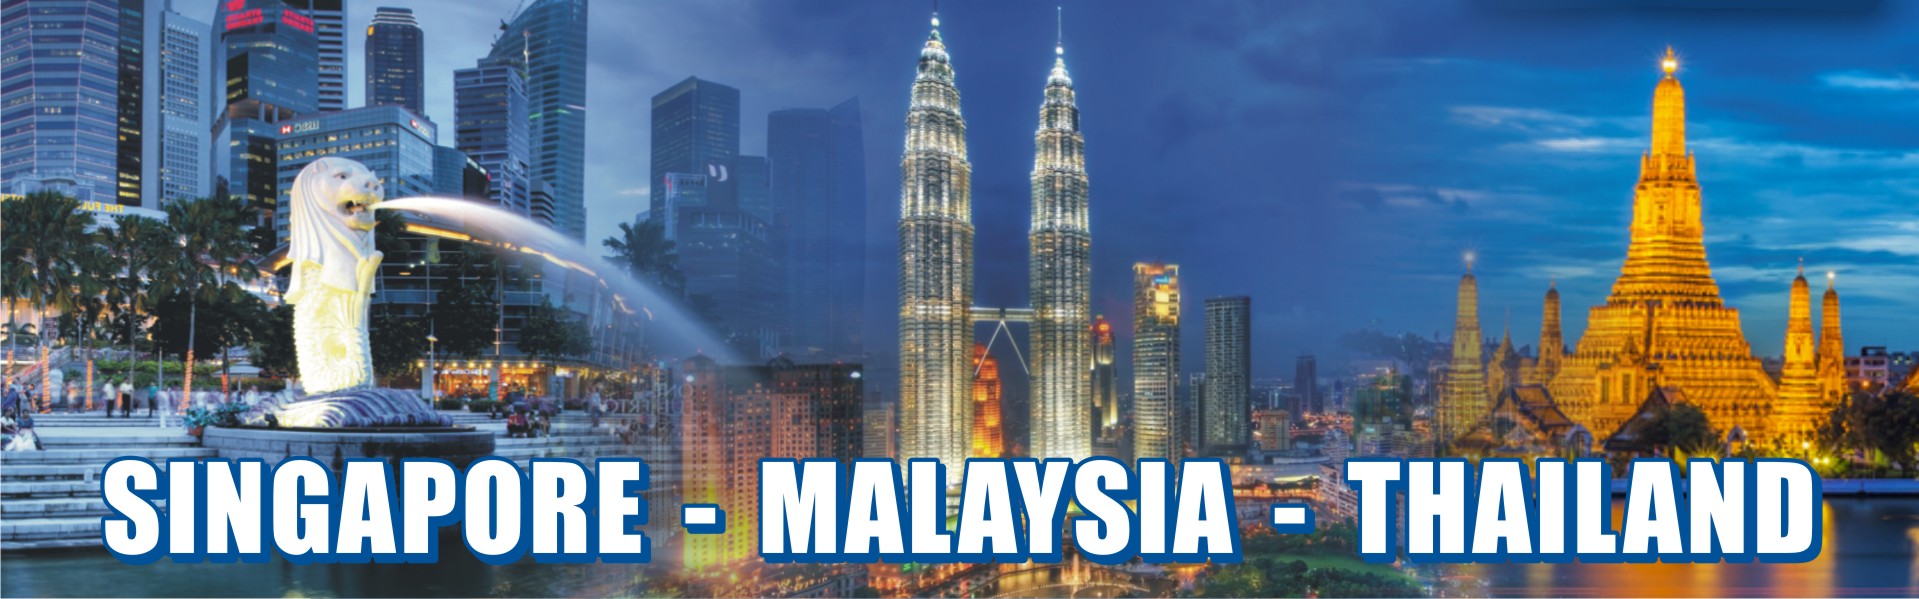 malaysia to thailand tour package